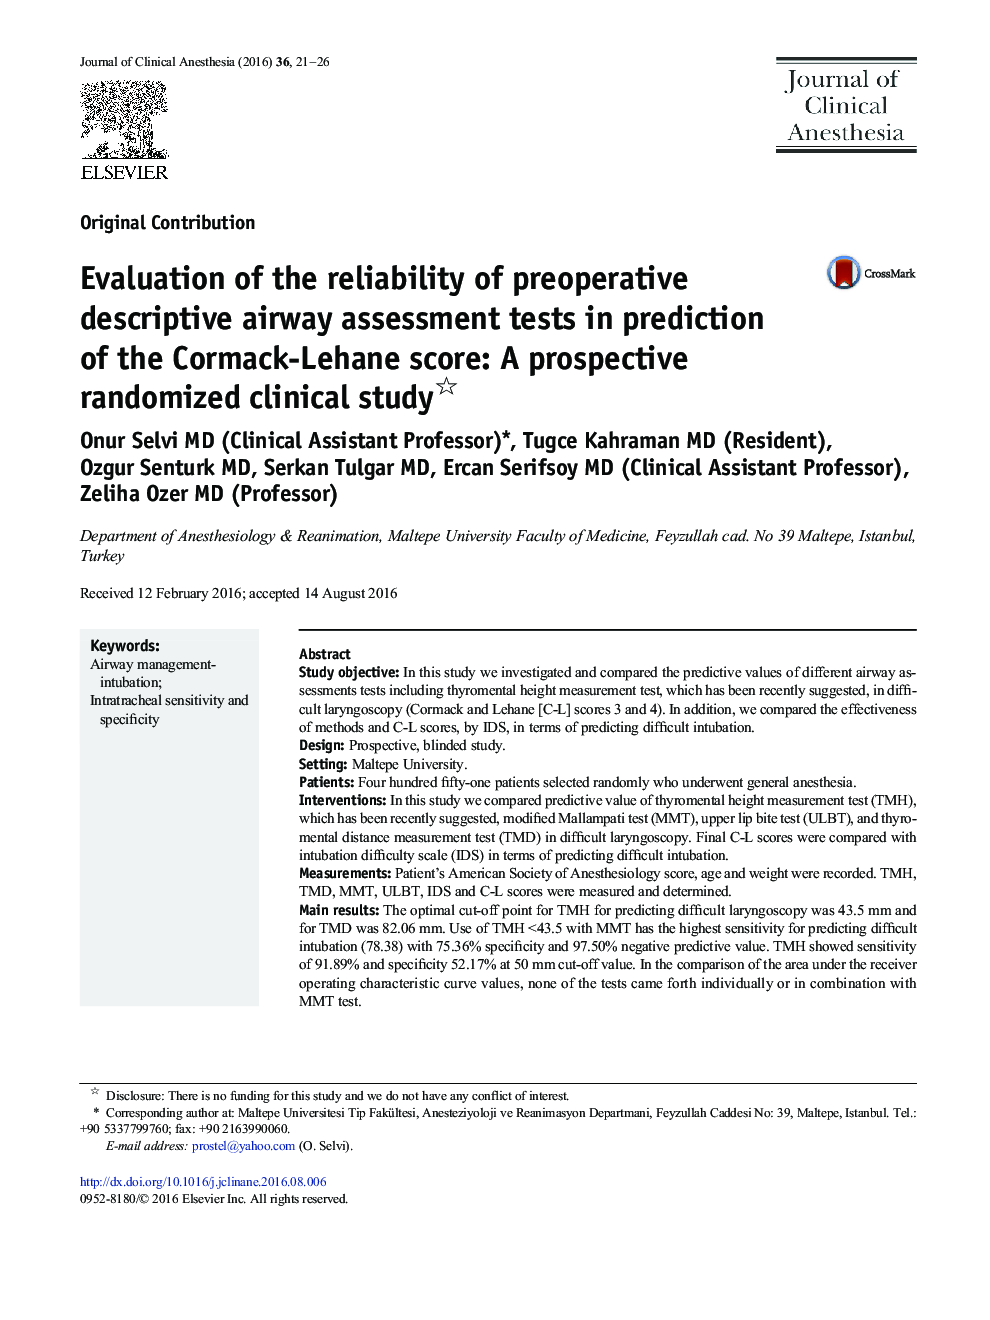 Evaluation of the reliability of preoperative descriptive airway assessment tests in prediction of the Cormack-Lehane score: A prospective randomized clinical study